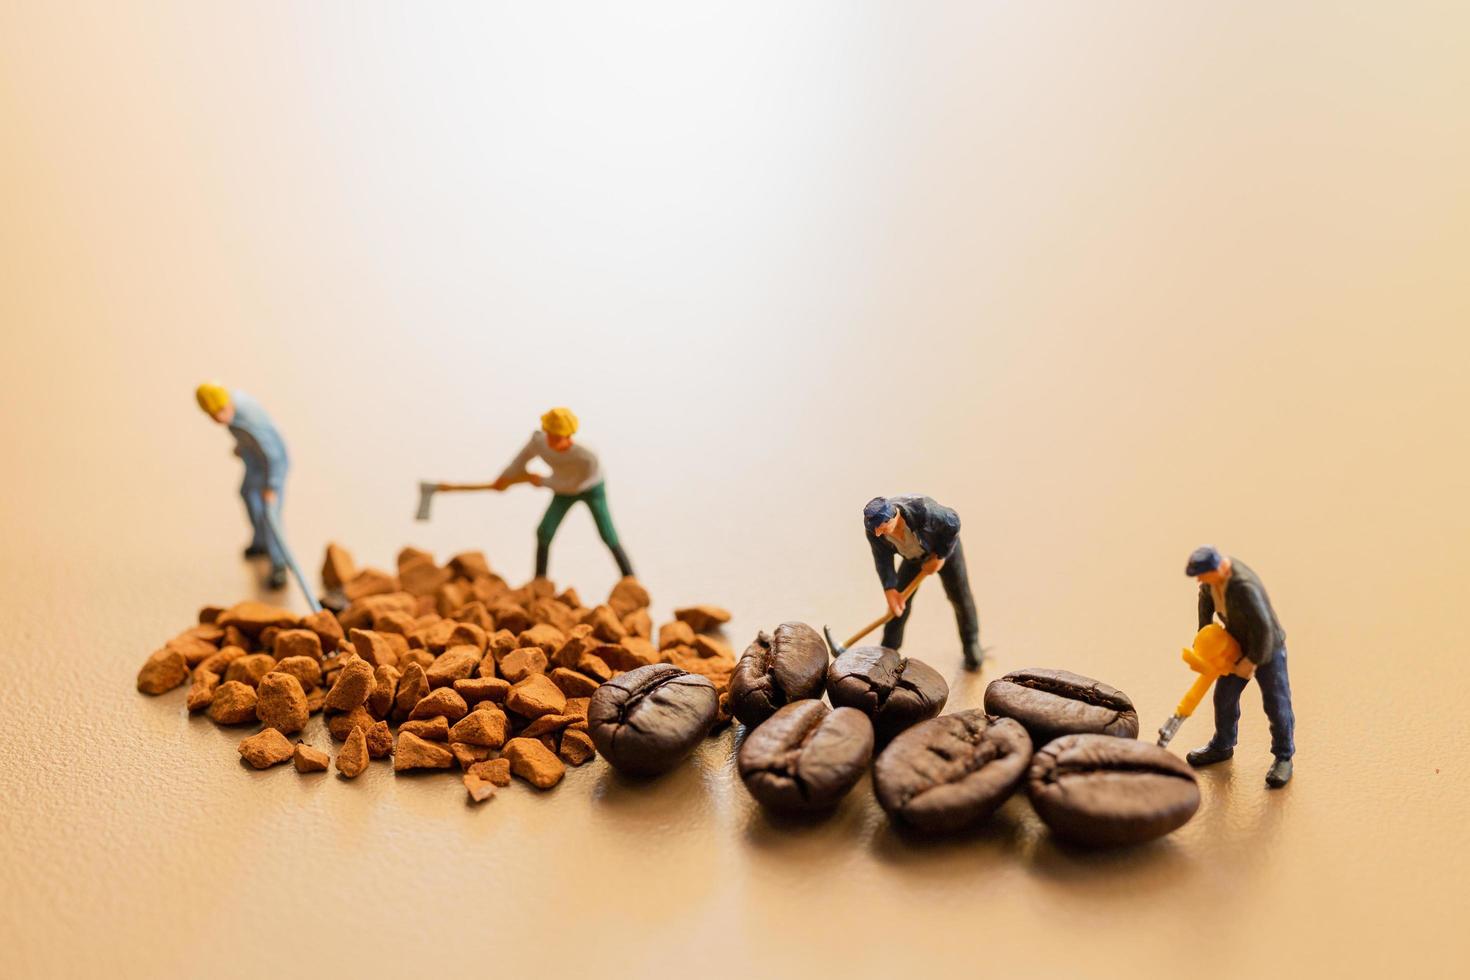 Miniature teams working together on coffee blending photo